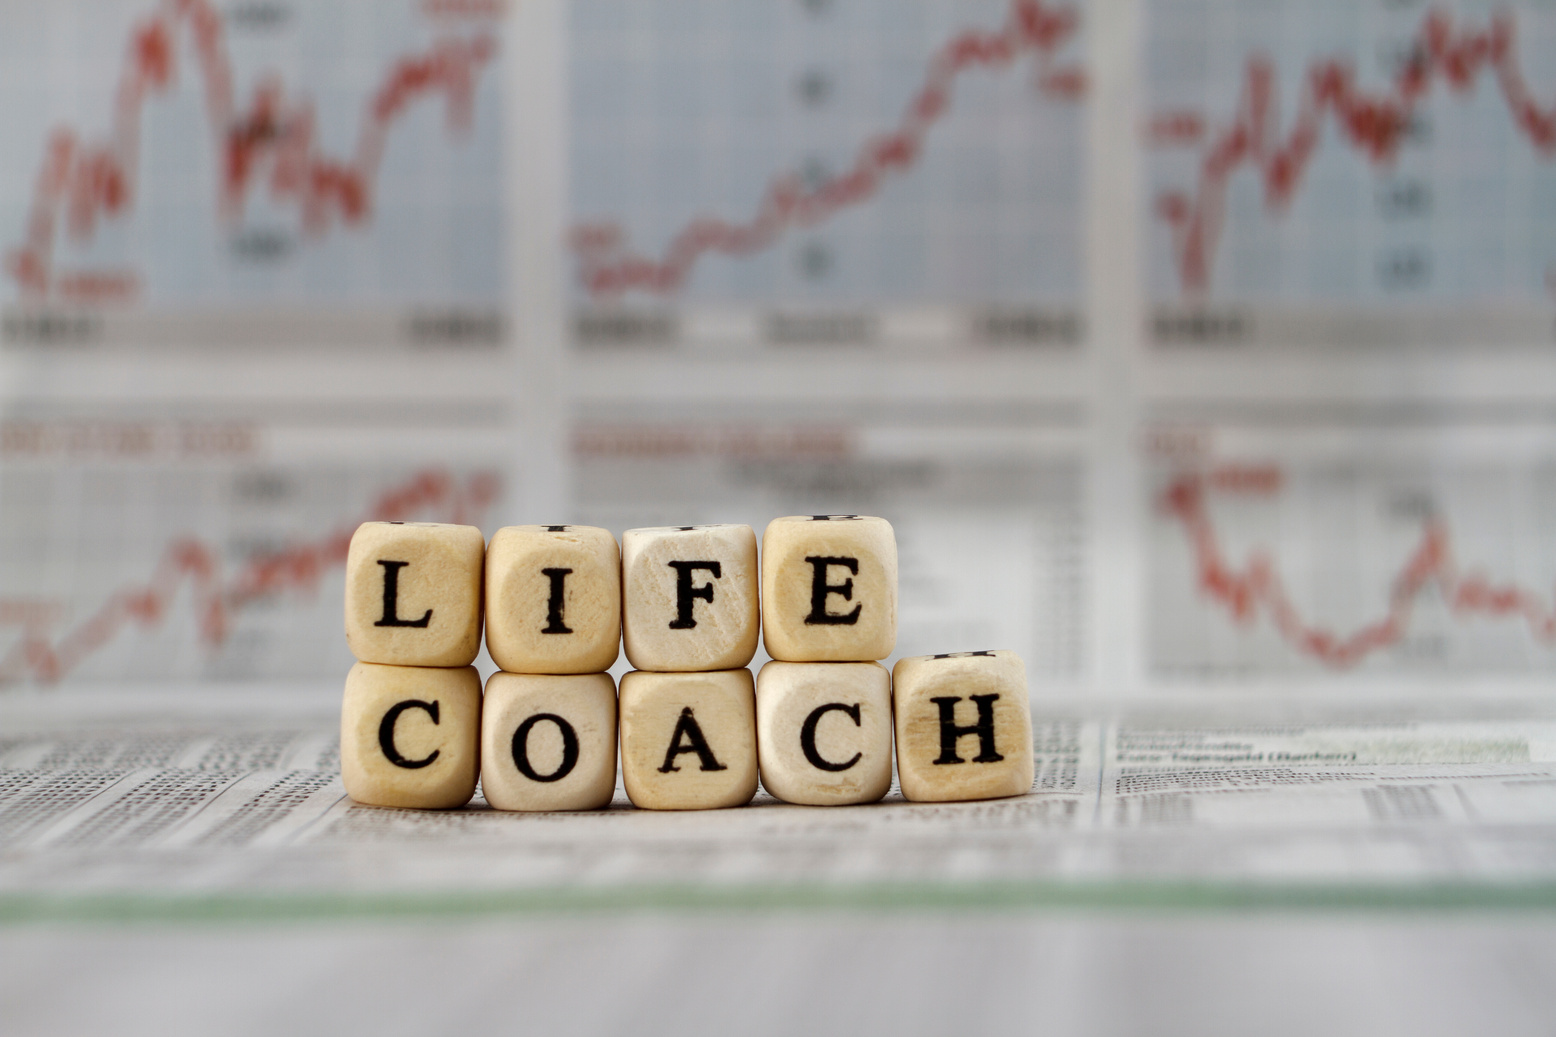 life coach built with letter cubes on newspaper background